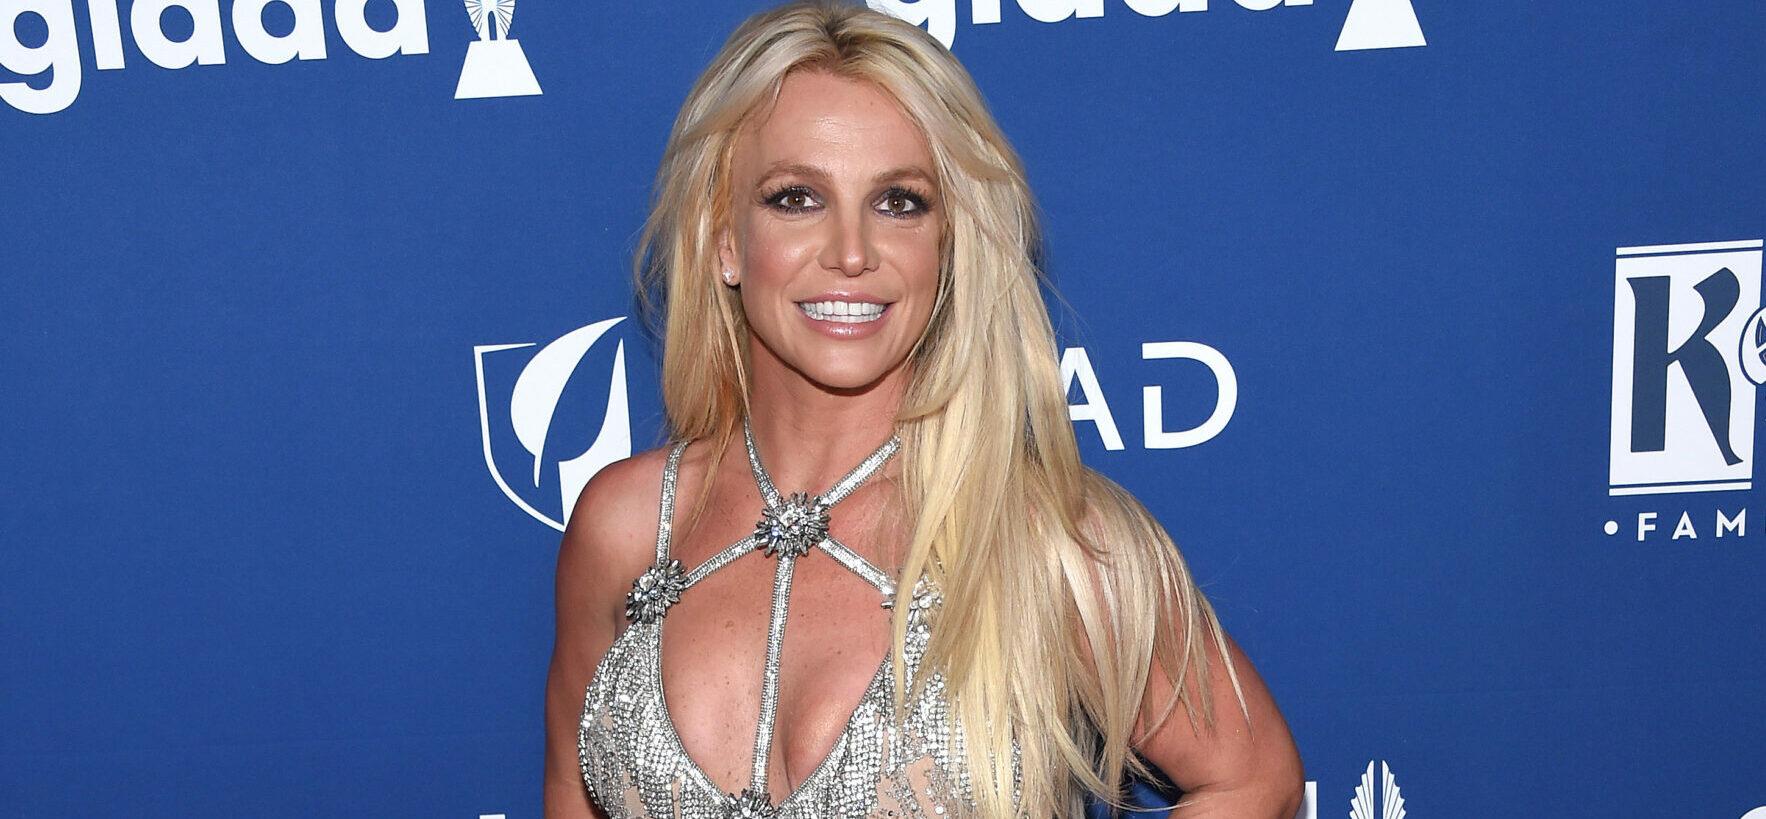 Britney Spears Went Horseback Riding In Mexico: ‘Had To Take My Top Off’